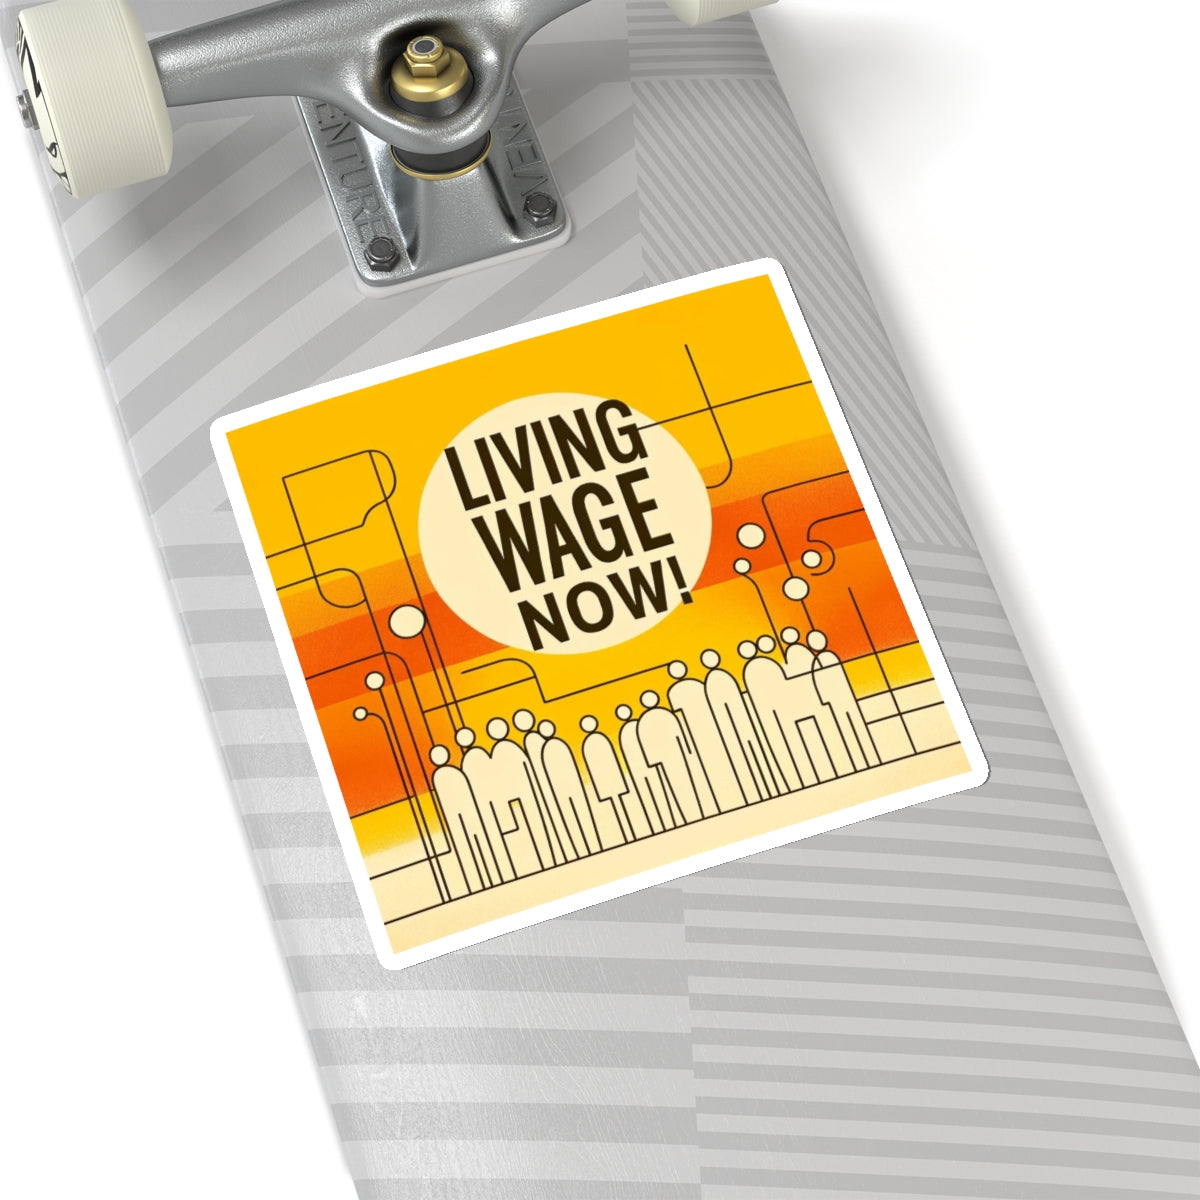 Living Wage Now! v4 Stickers